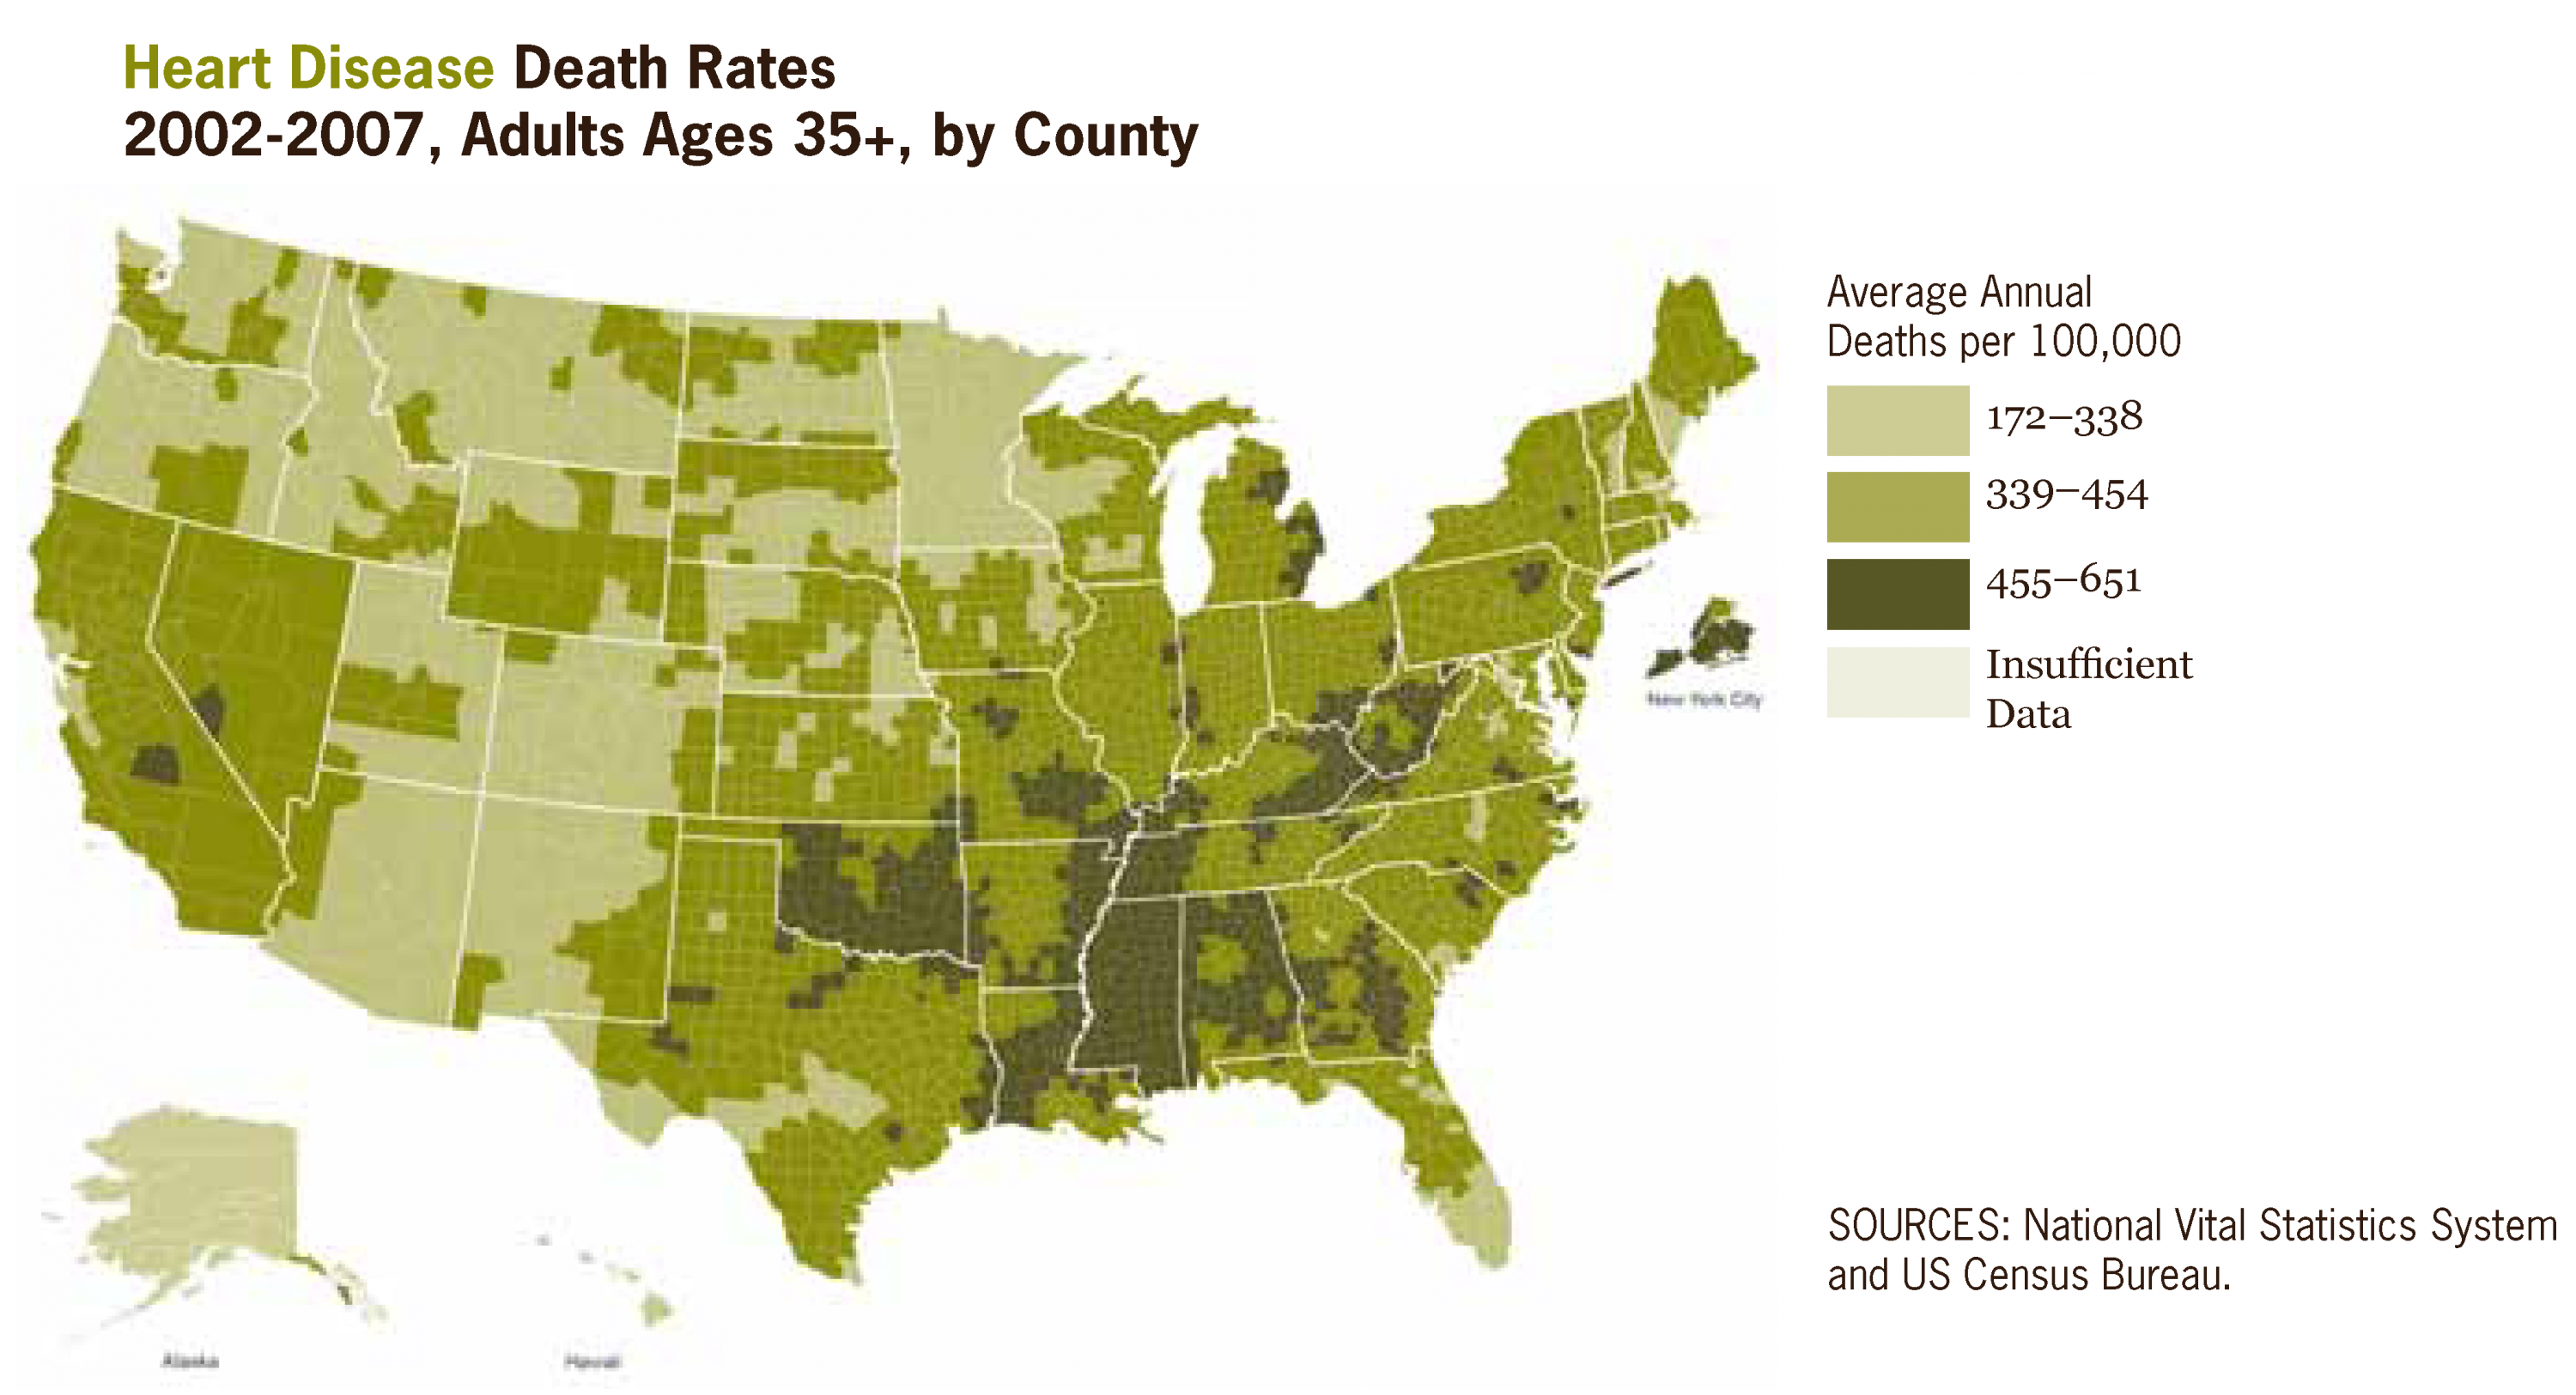 Heart_Disease_Death_Rates_2002-2007_Adults_35+_by_county_US